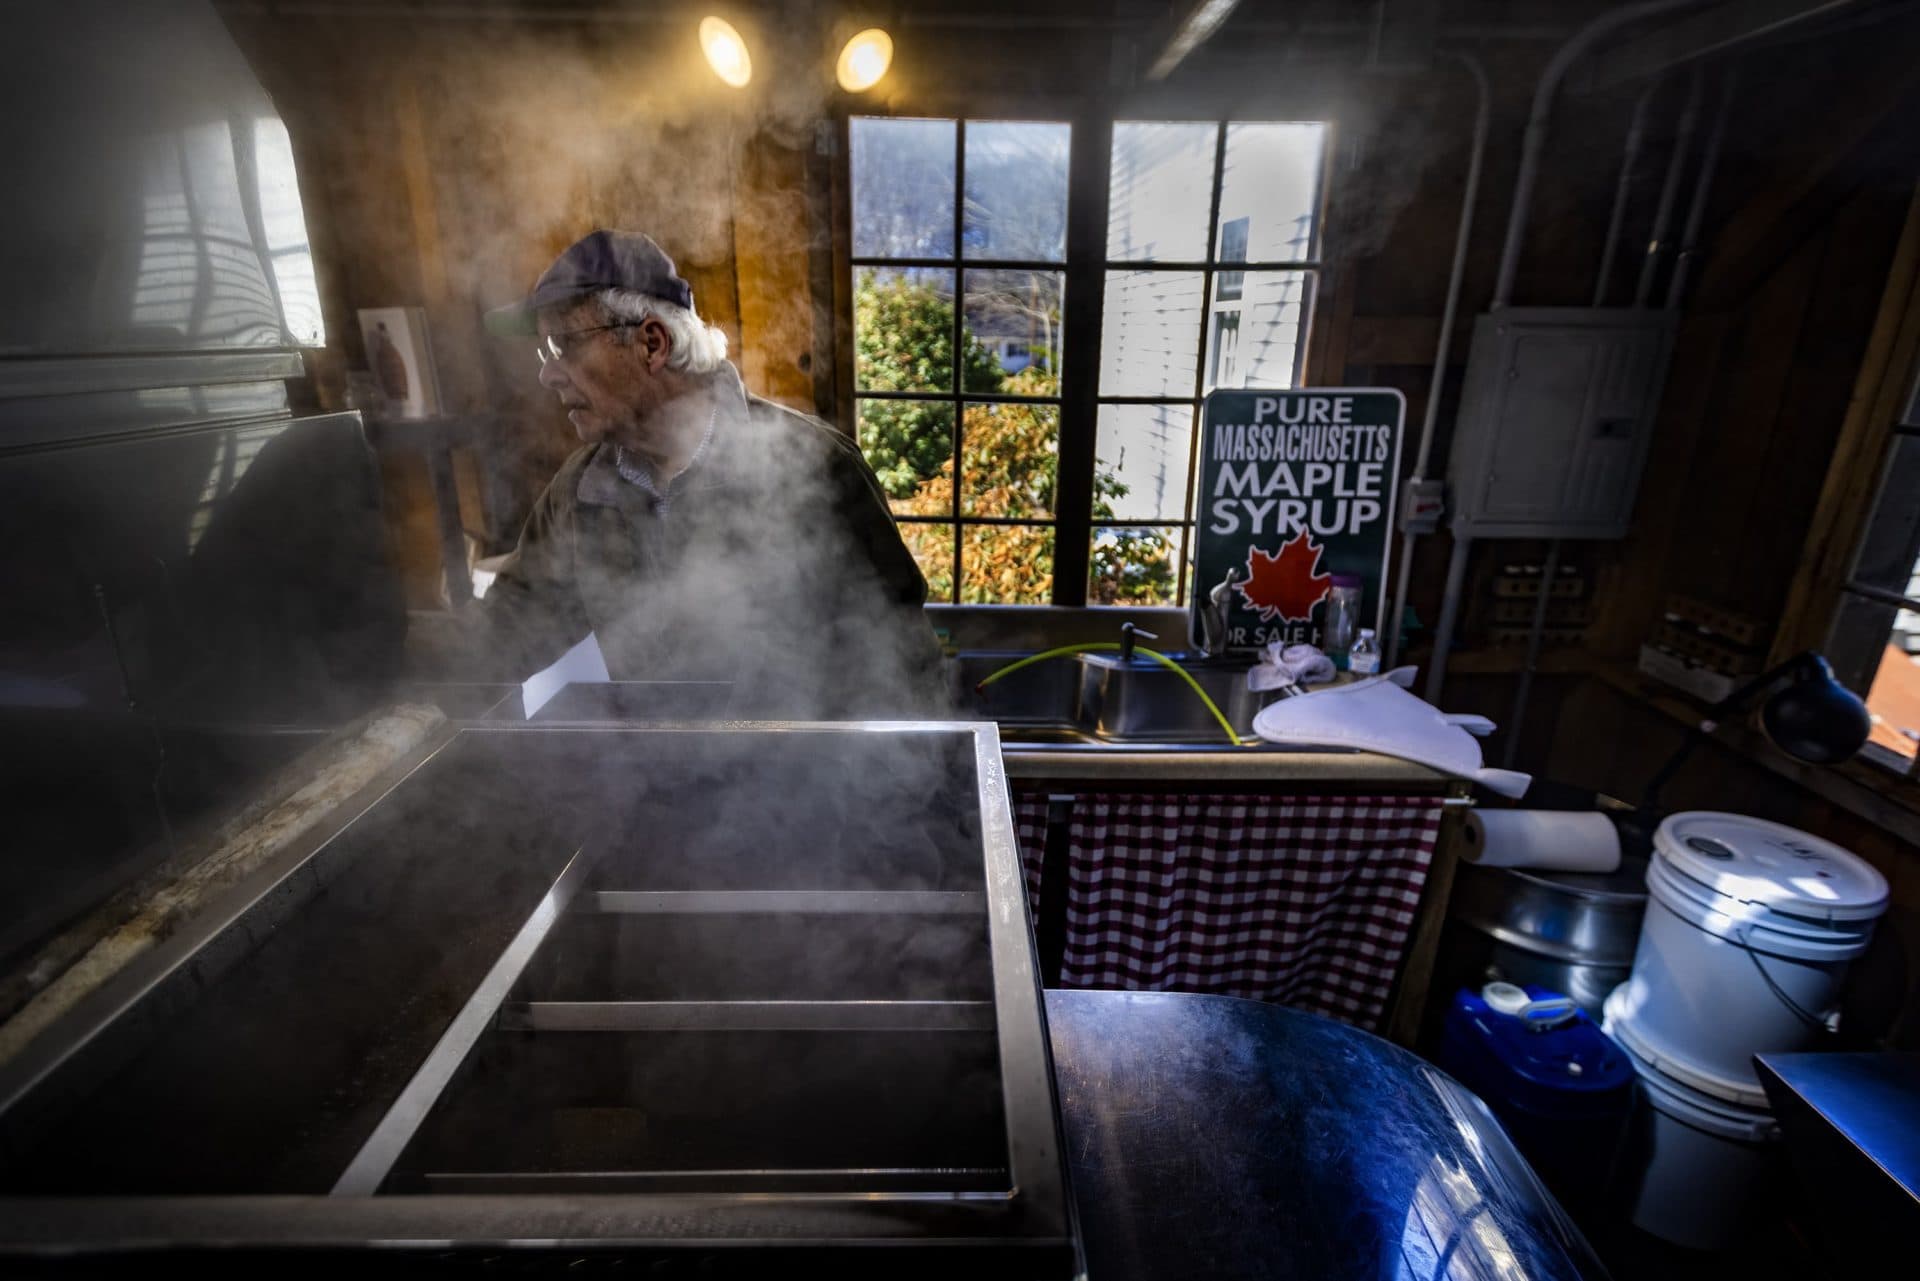 Ronald Kay checks the evaporator in the maple sugar shack at Maynard Maple to process sap he’s collected to make locally-sourced maple syrup. (Jesse Costa/WBUR)